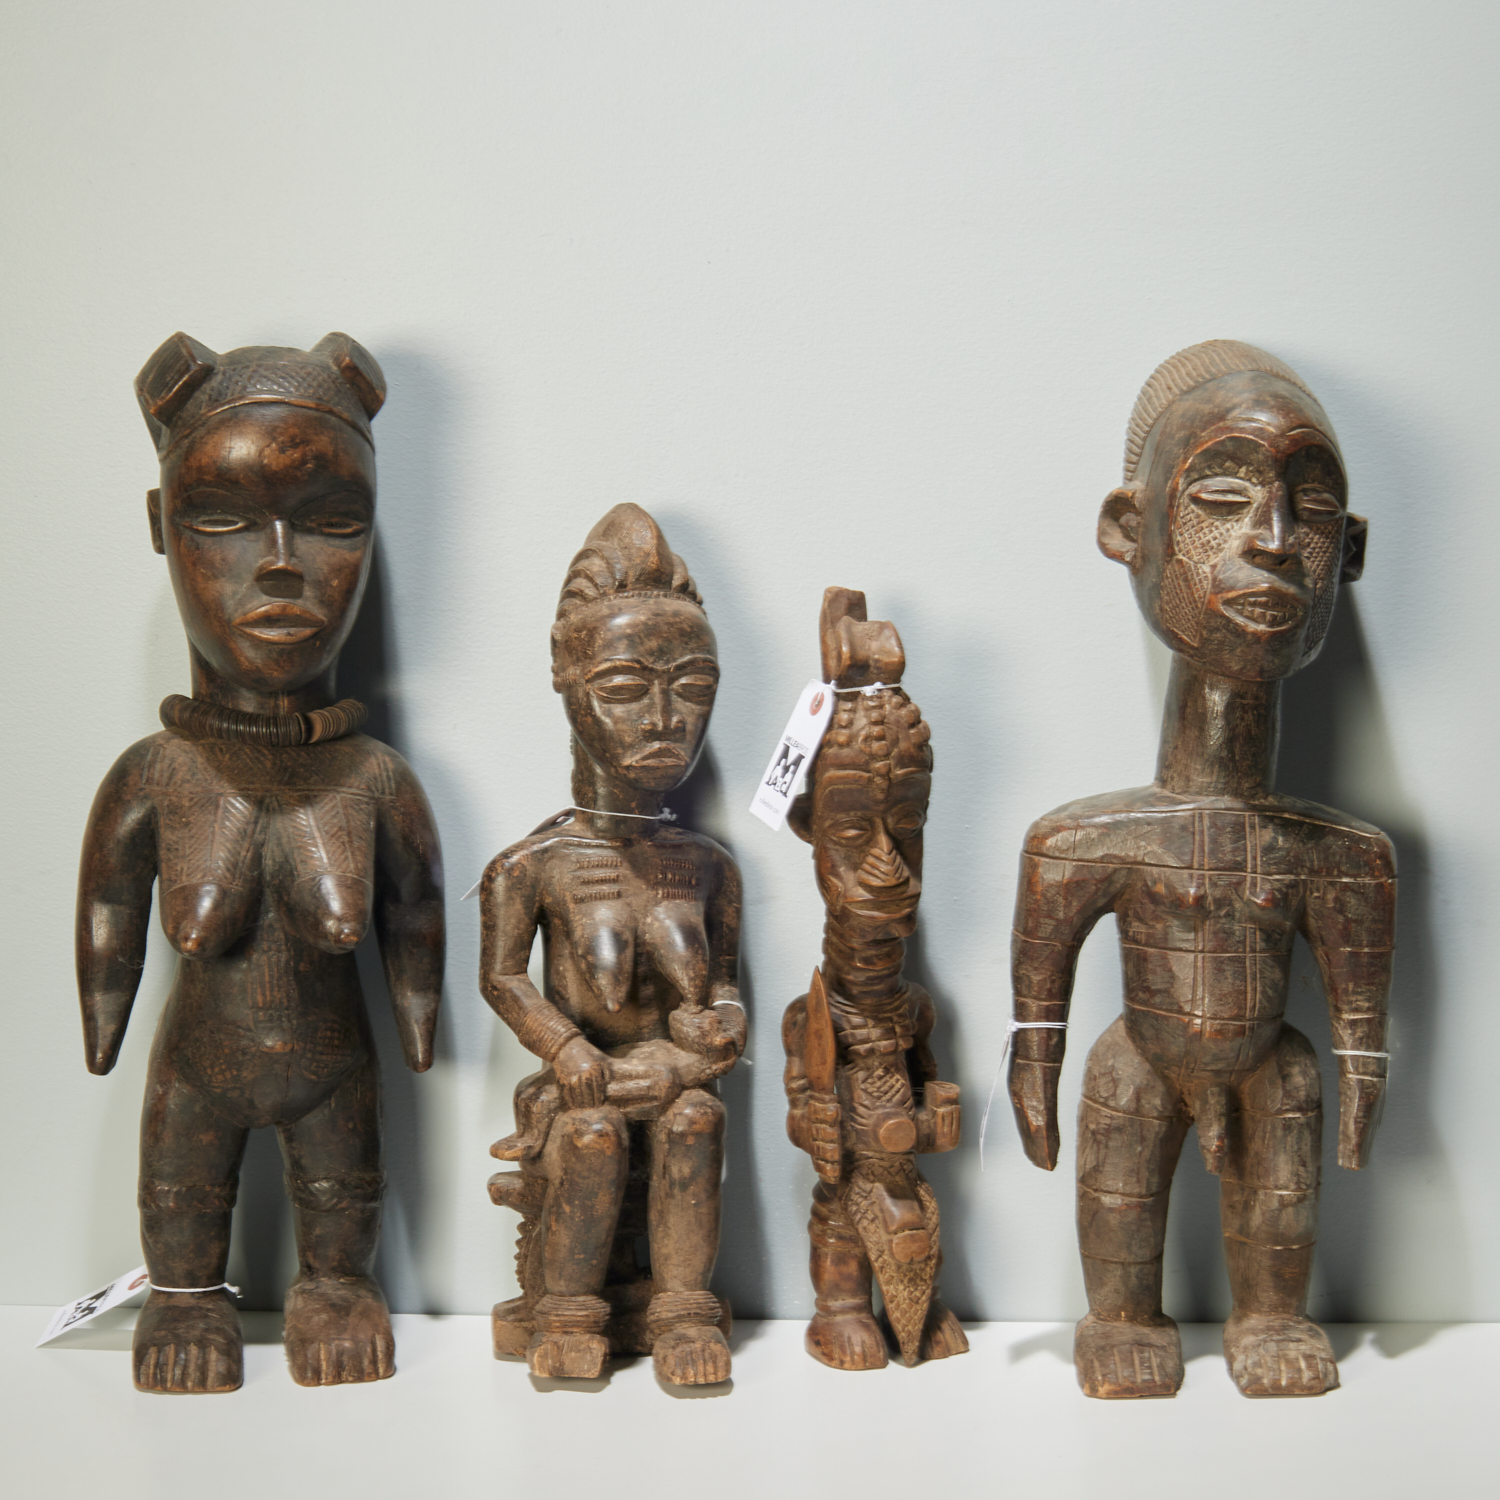  4 LARGE AFRICAN STYLE CARVED 36165c